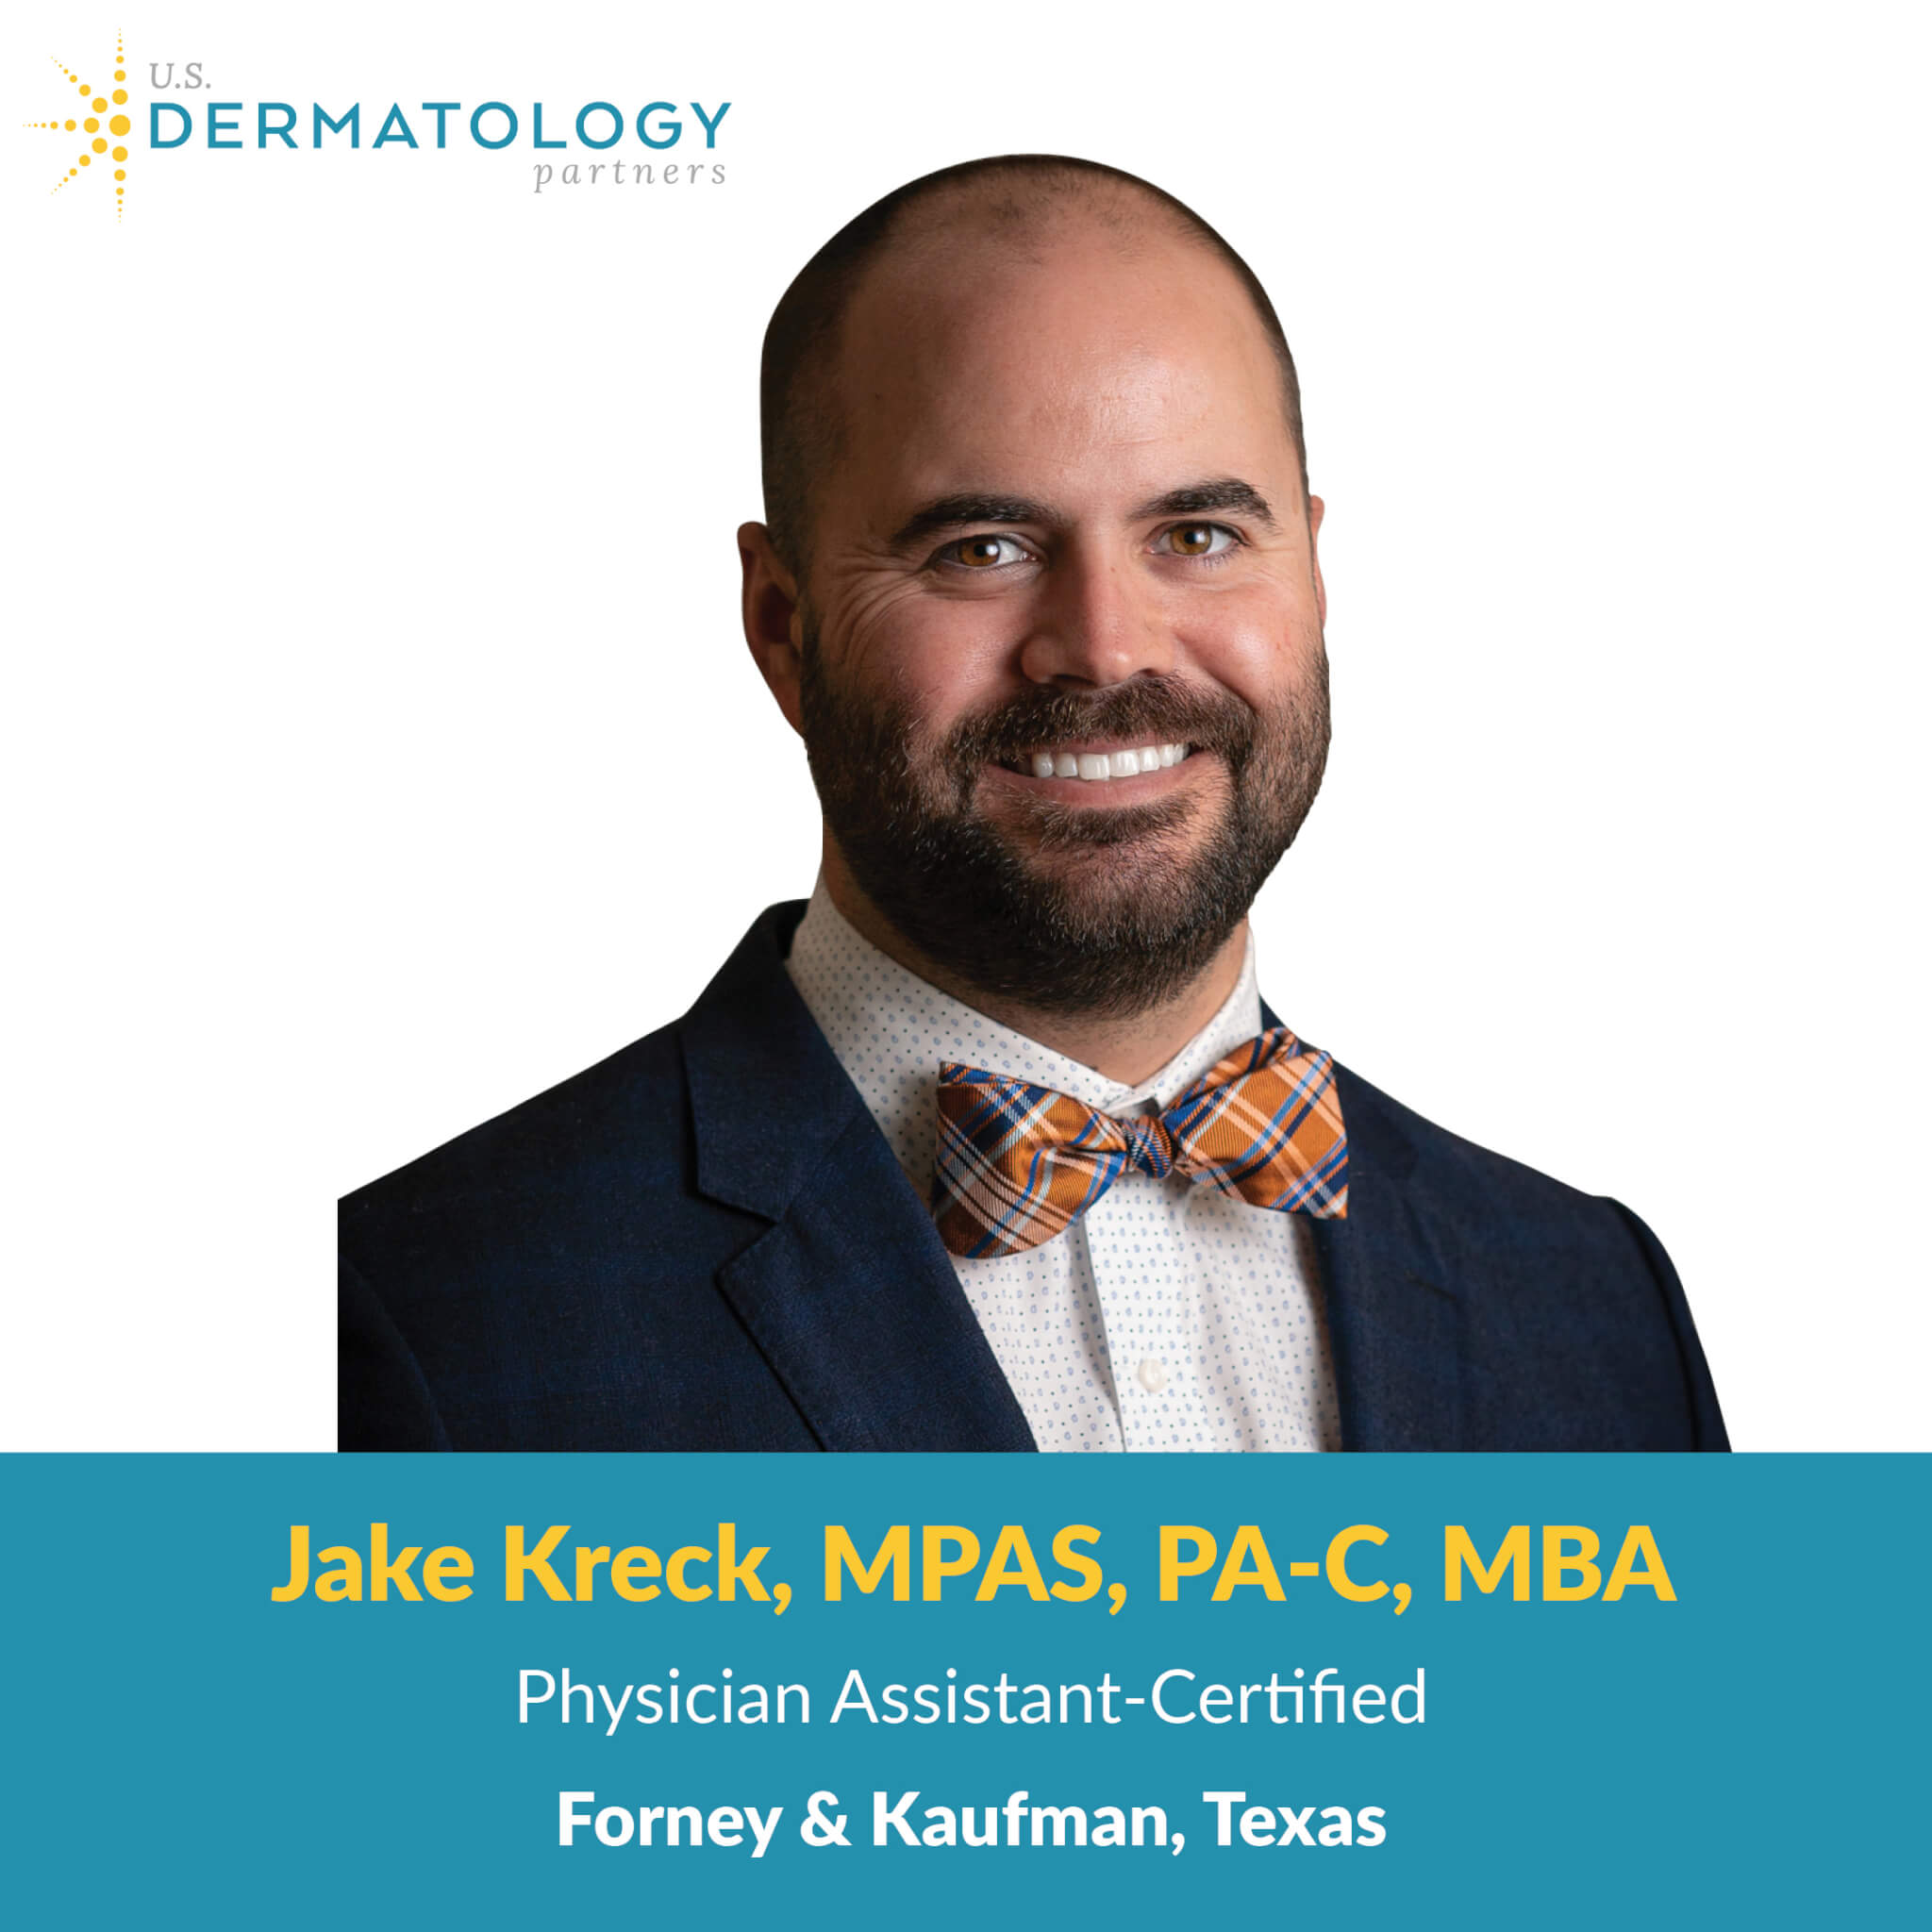 Jake Kreck, PA-C is a certified physician assistant at U.S. Dermatology Partners in Forney and Kaufman, Texas. Now accepting new patients!